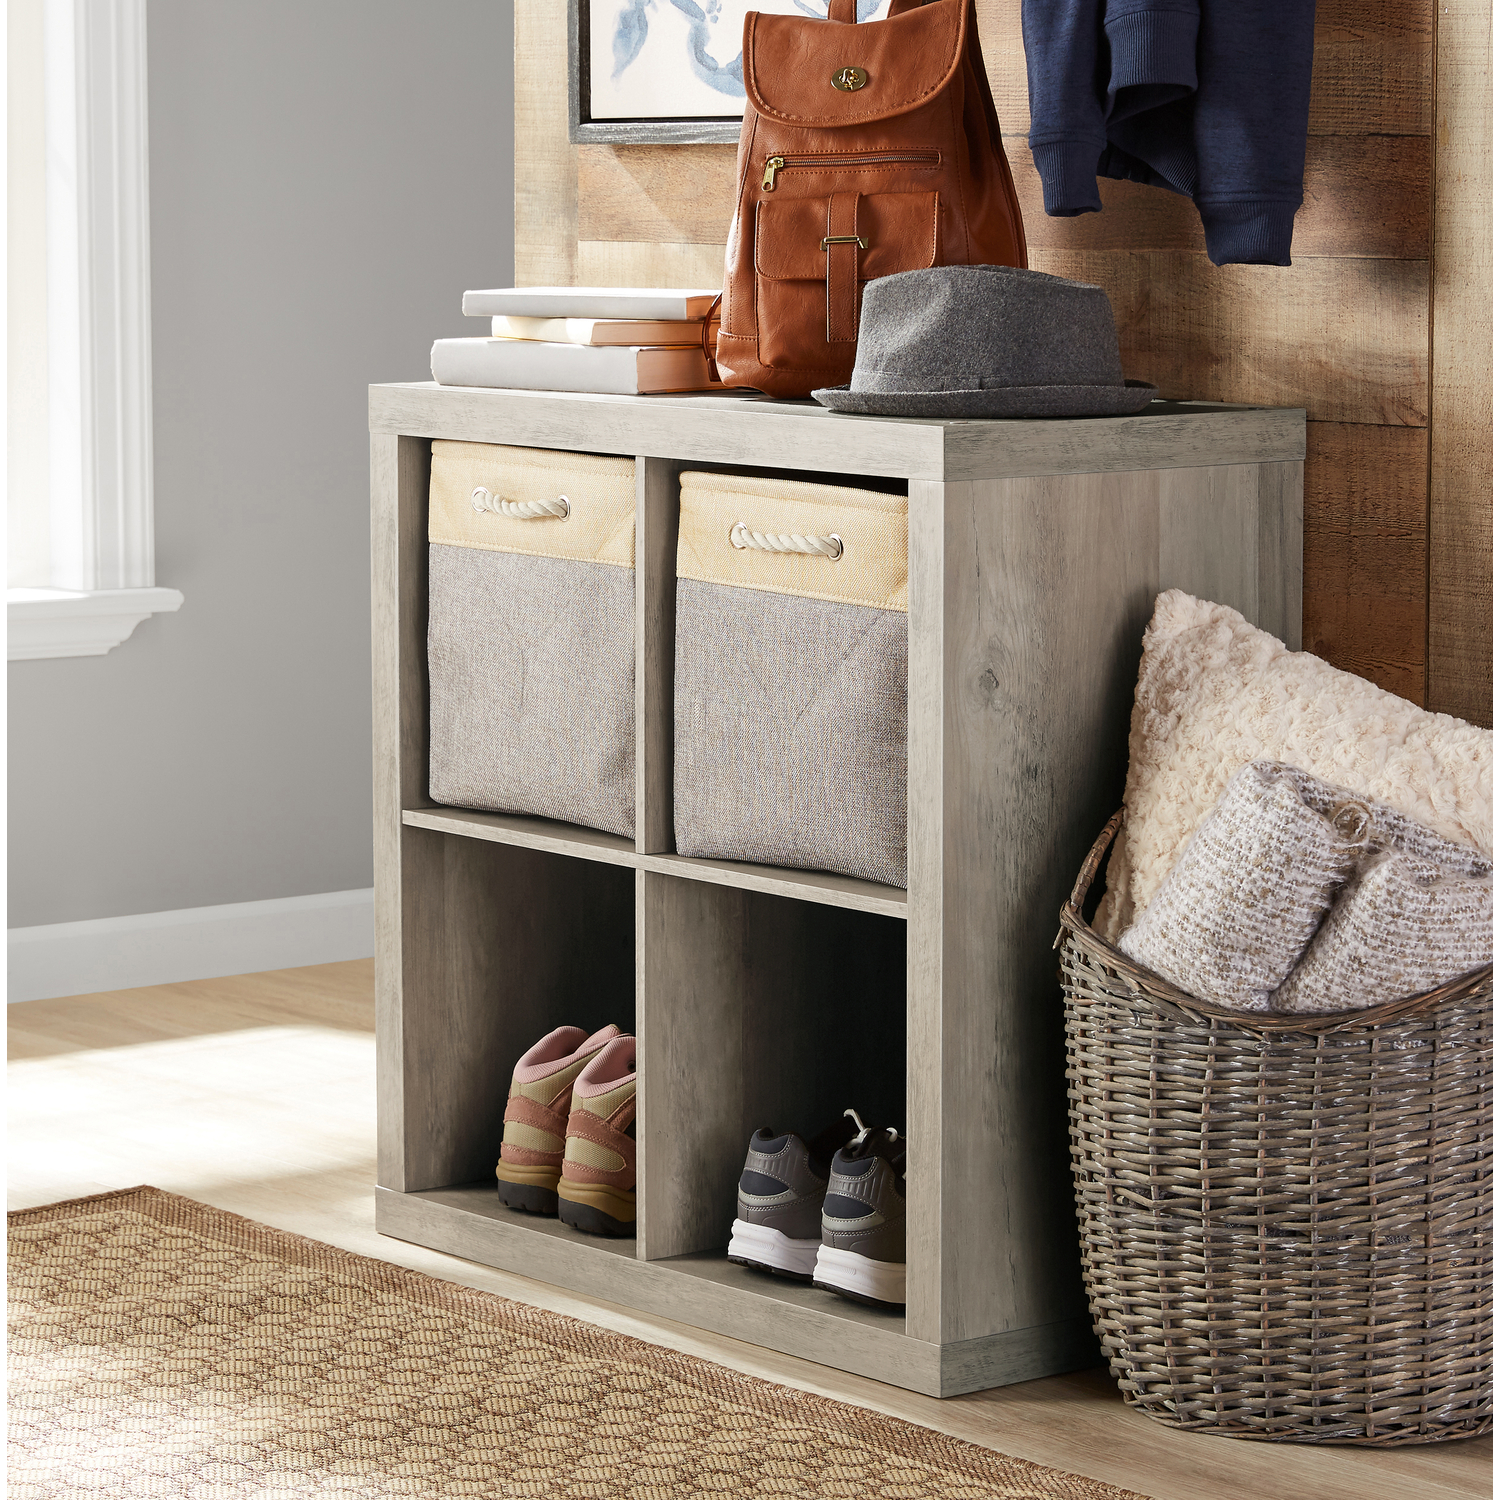 Better Homes & Gardens 4-Cube Storage Organizer, Rustic Gray - image 1 of 7